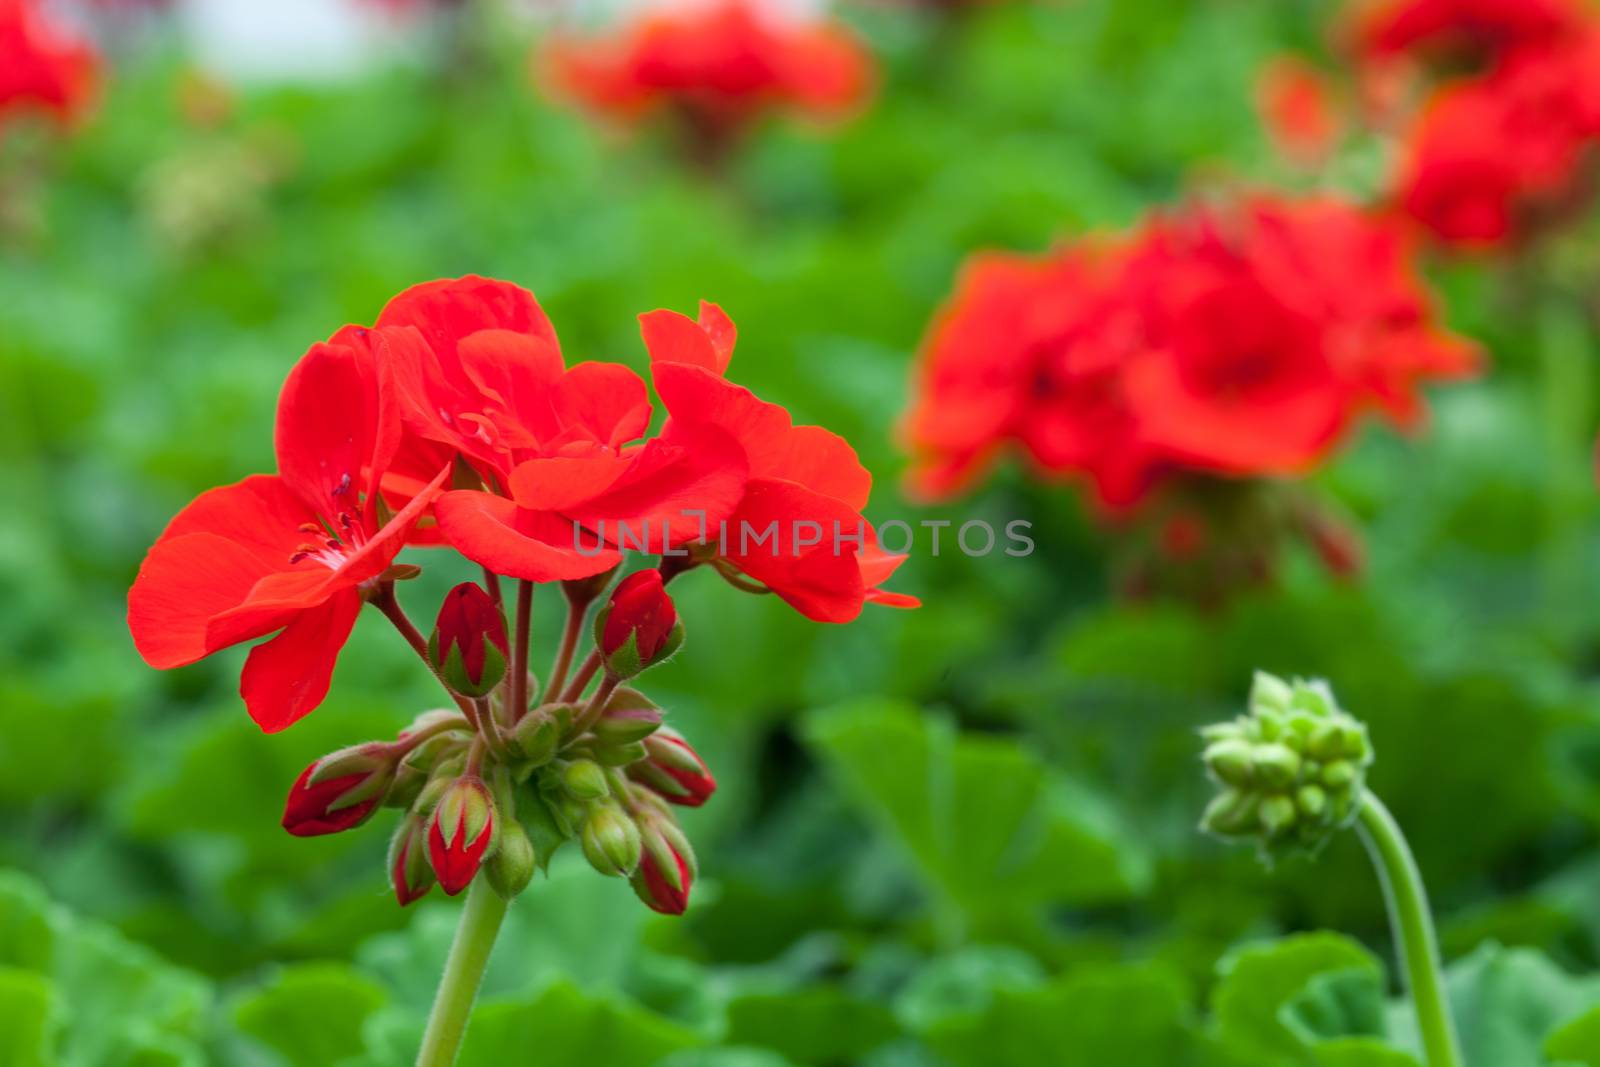 Macro closeup of some red flowers with a shallow depth of field.